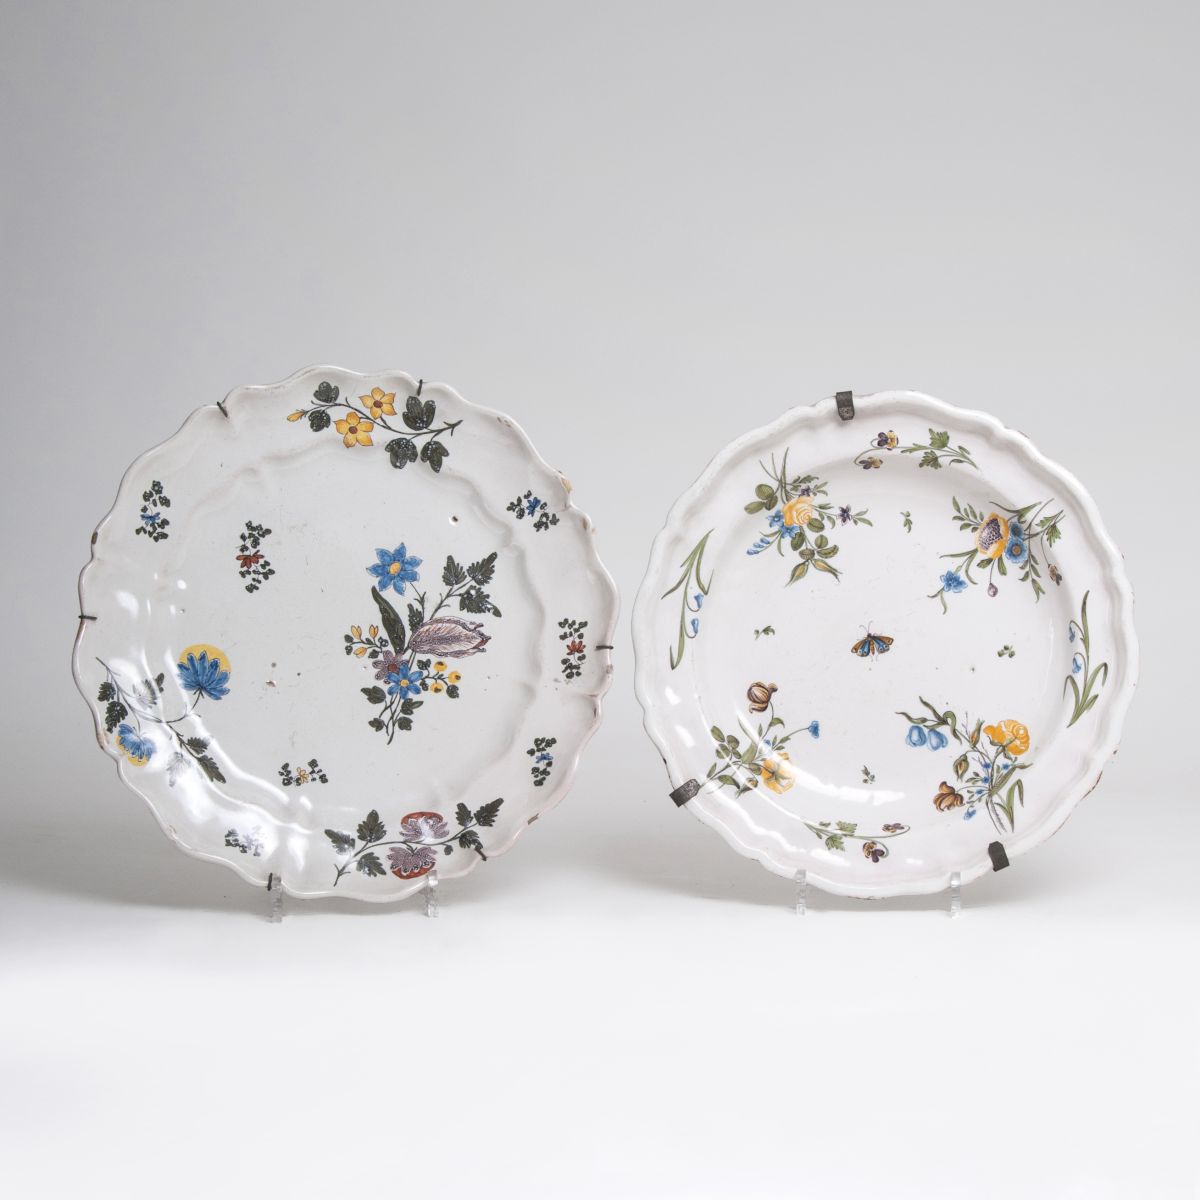 A pair of large faience platters with flower painting